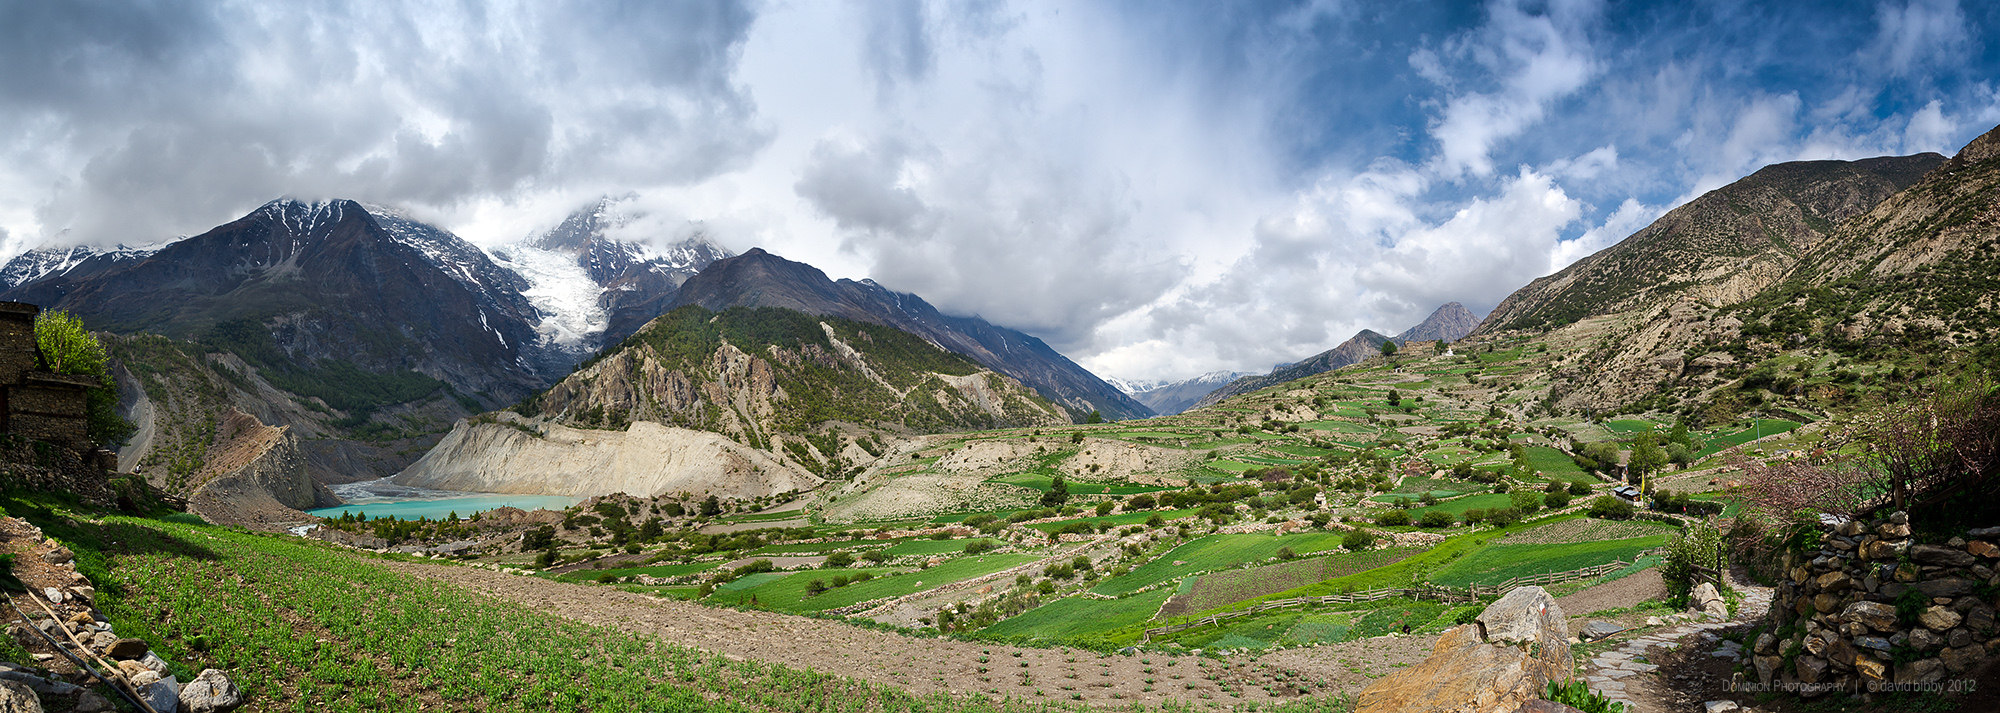  Cultivated fields on the western side of the village of Manang (3540m). The mountain peak to the right of the glacier is Ganggapurna (7454m). Annapurna Conservation Area. 